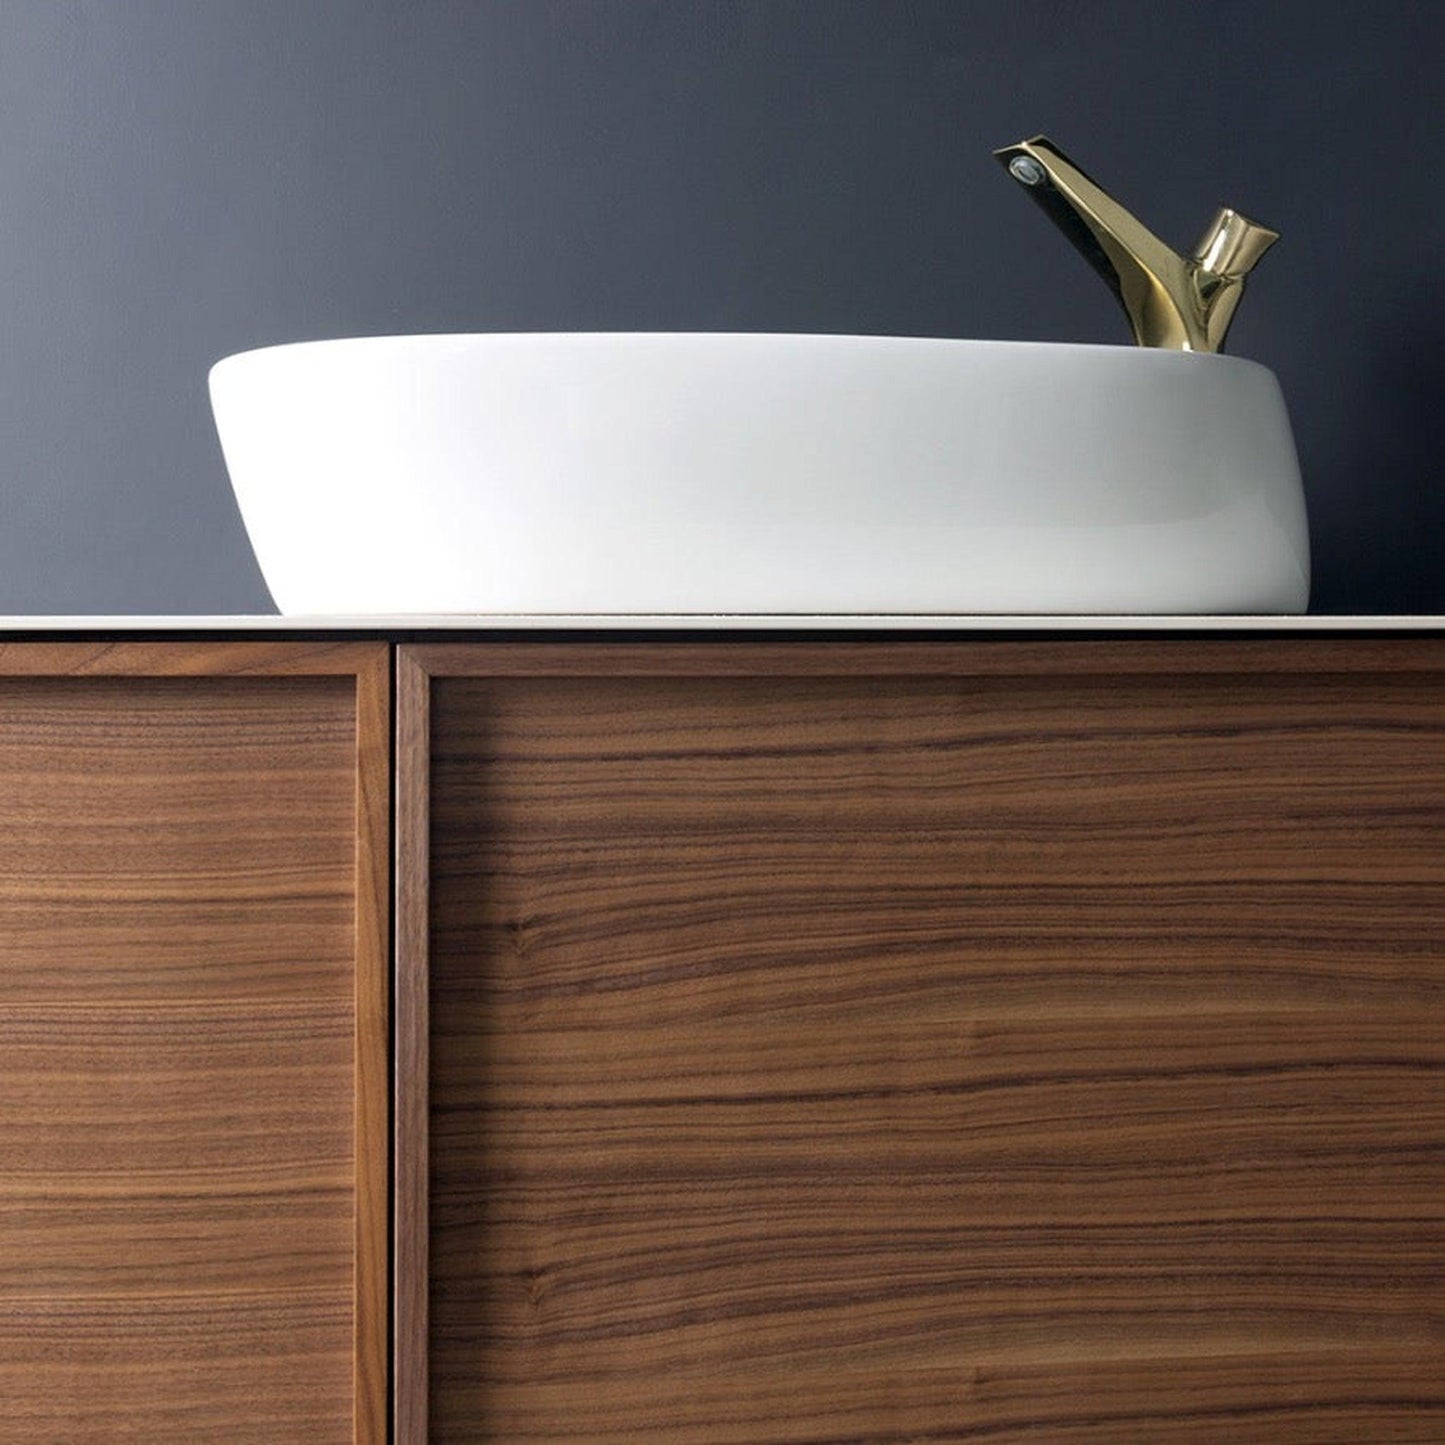 TONA Forest 65" Natural Walnut Grain Solid Wood Wall-Mounted Bathroom Vanity With Glossy White Single Vessel Sink